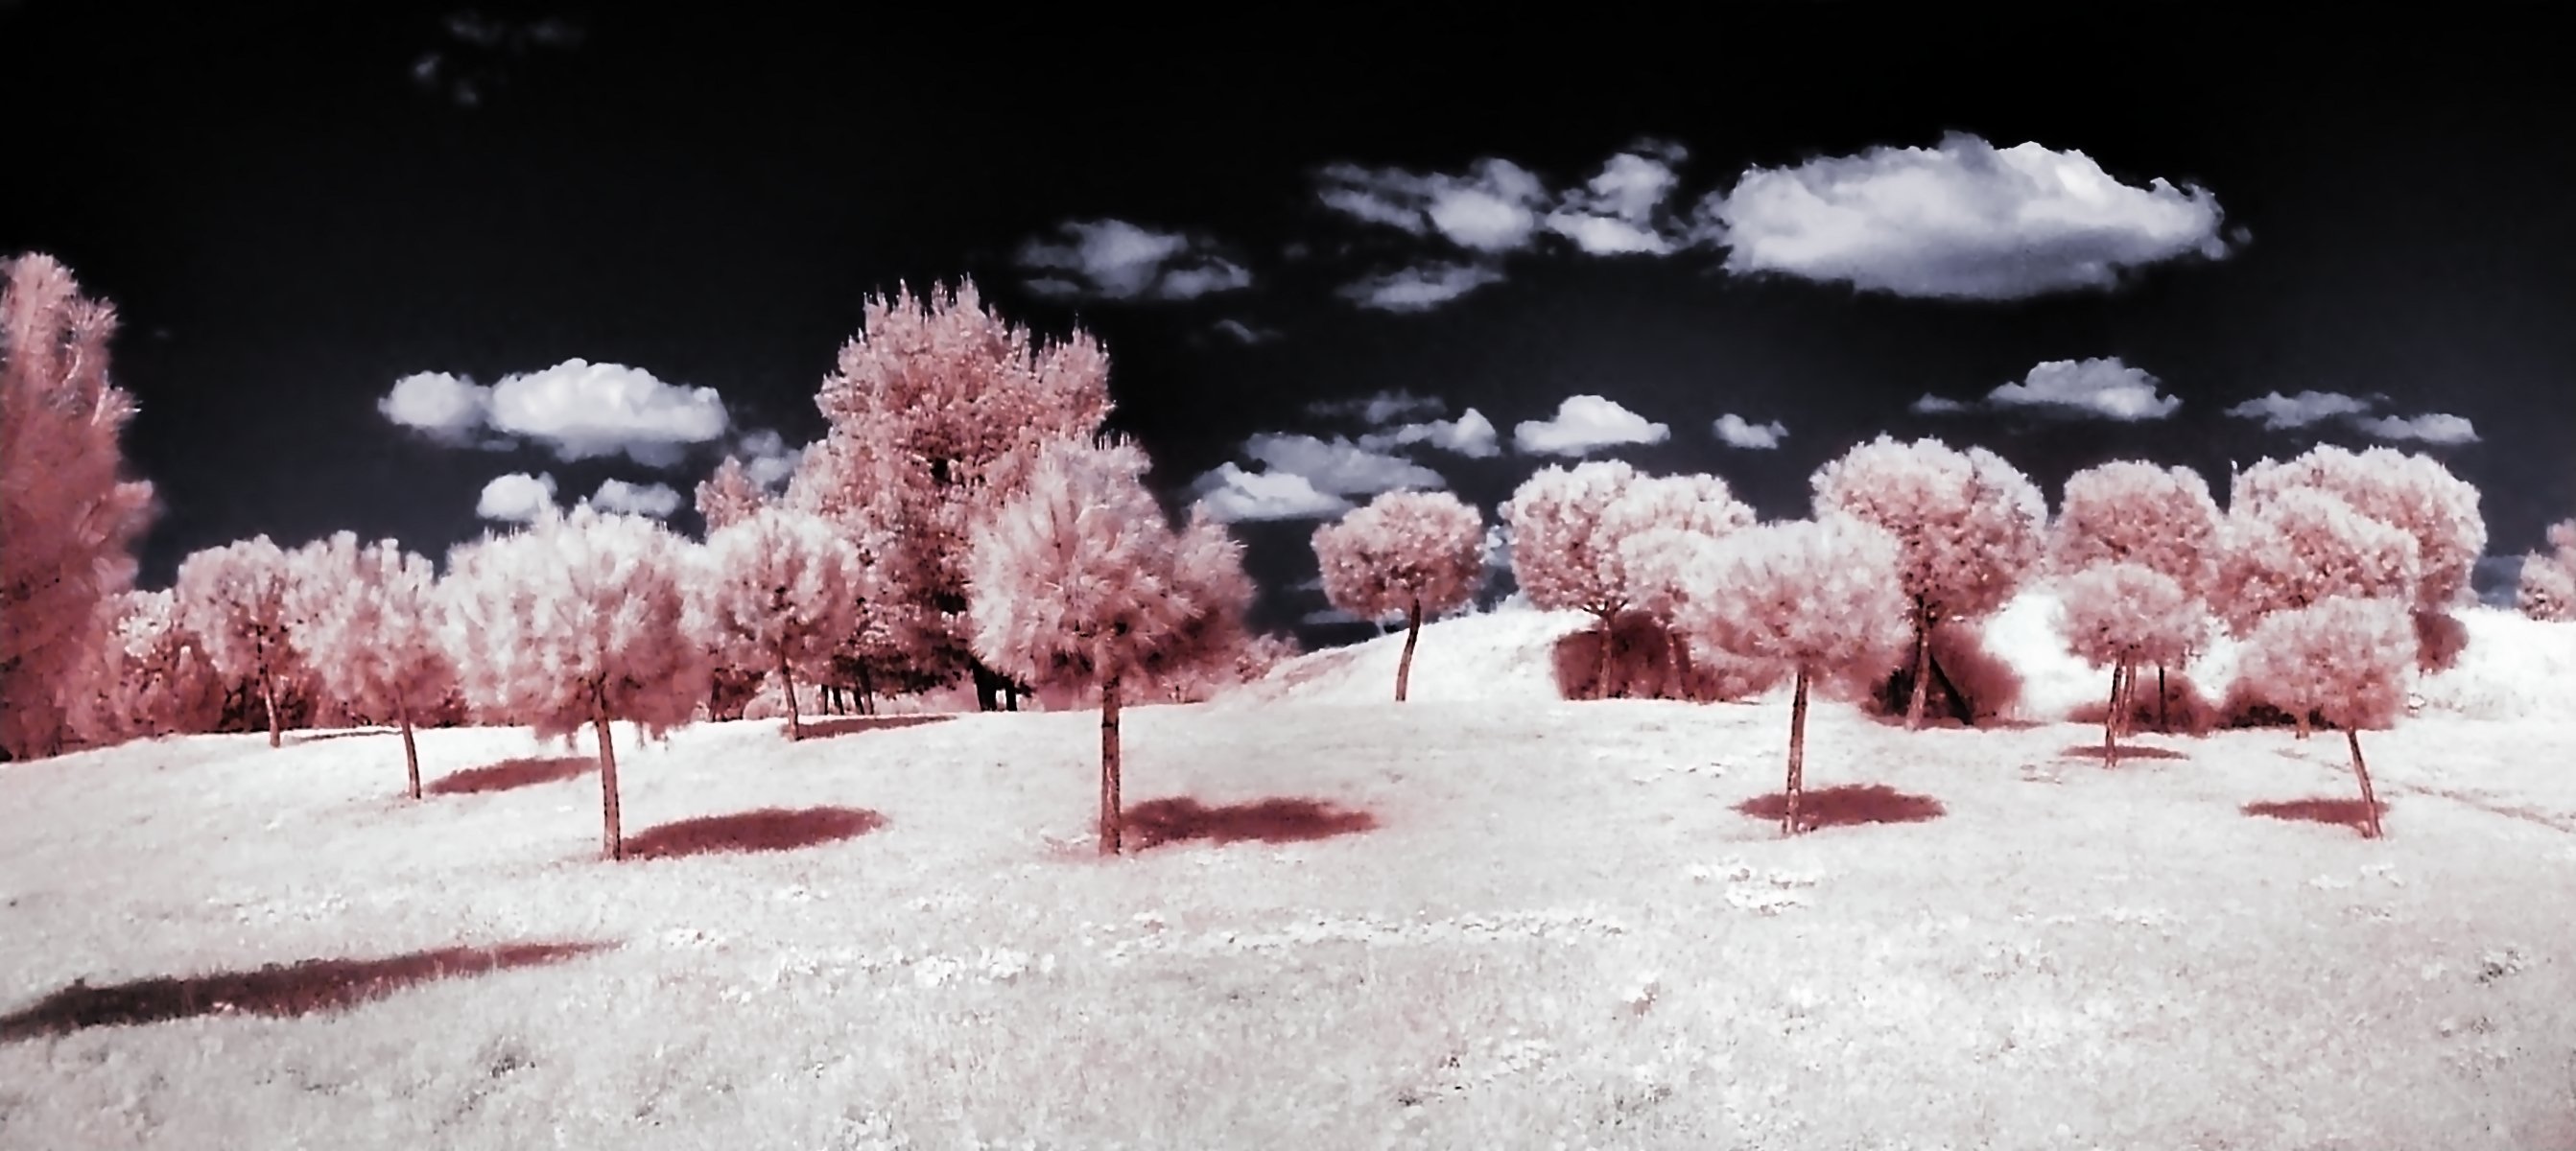 Photography Infrared 2685x1200